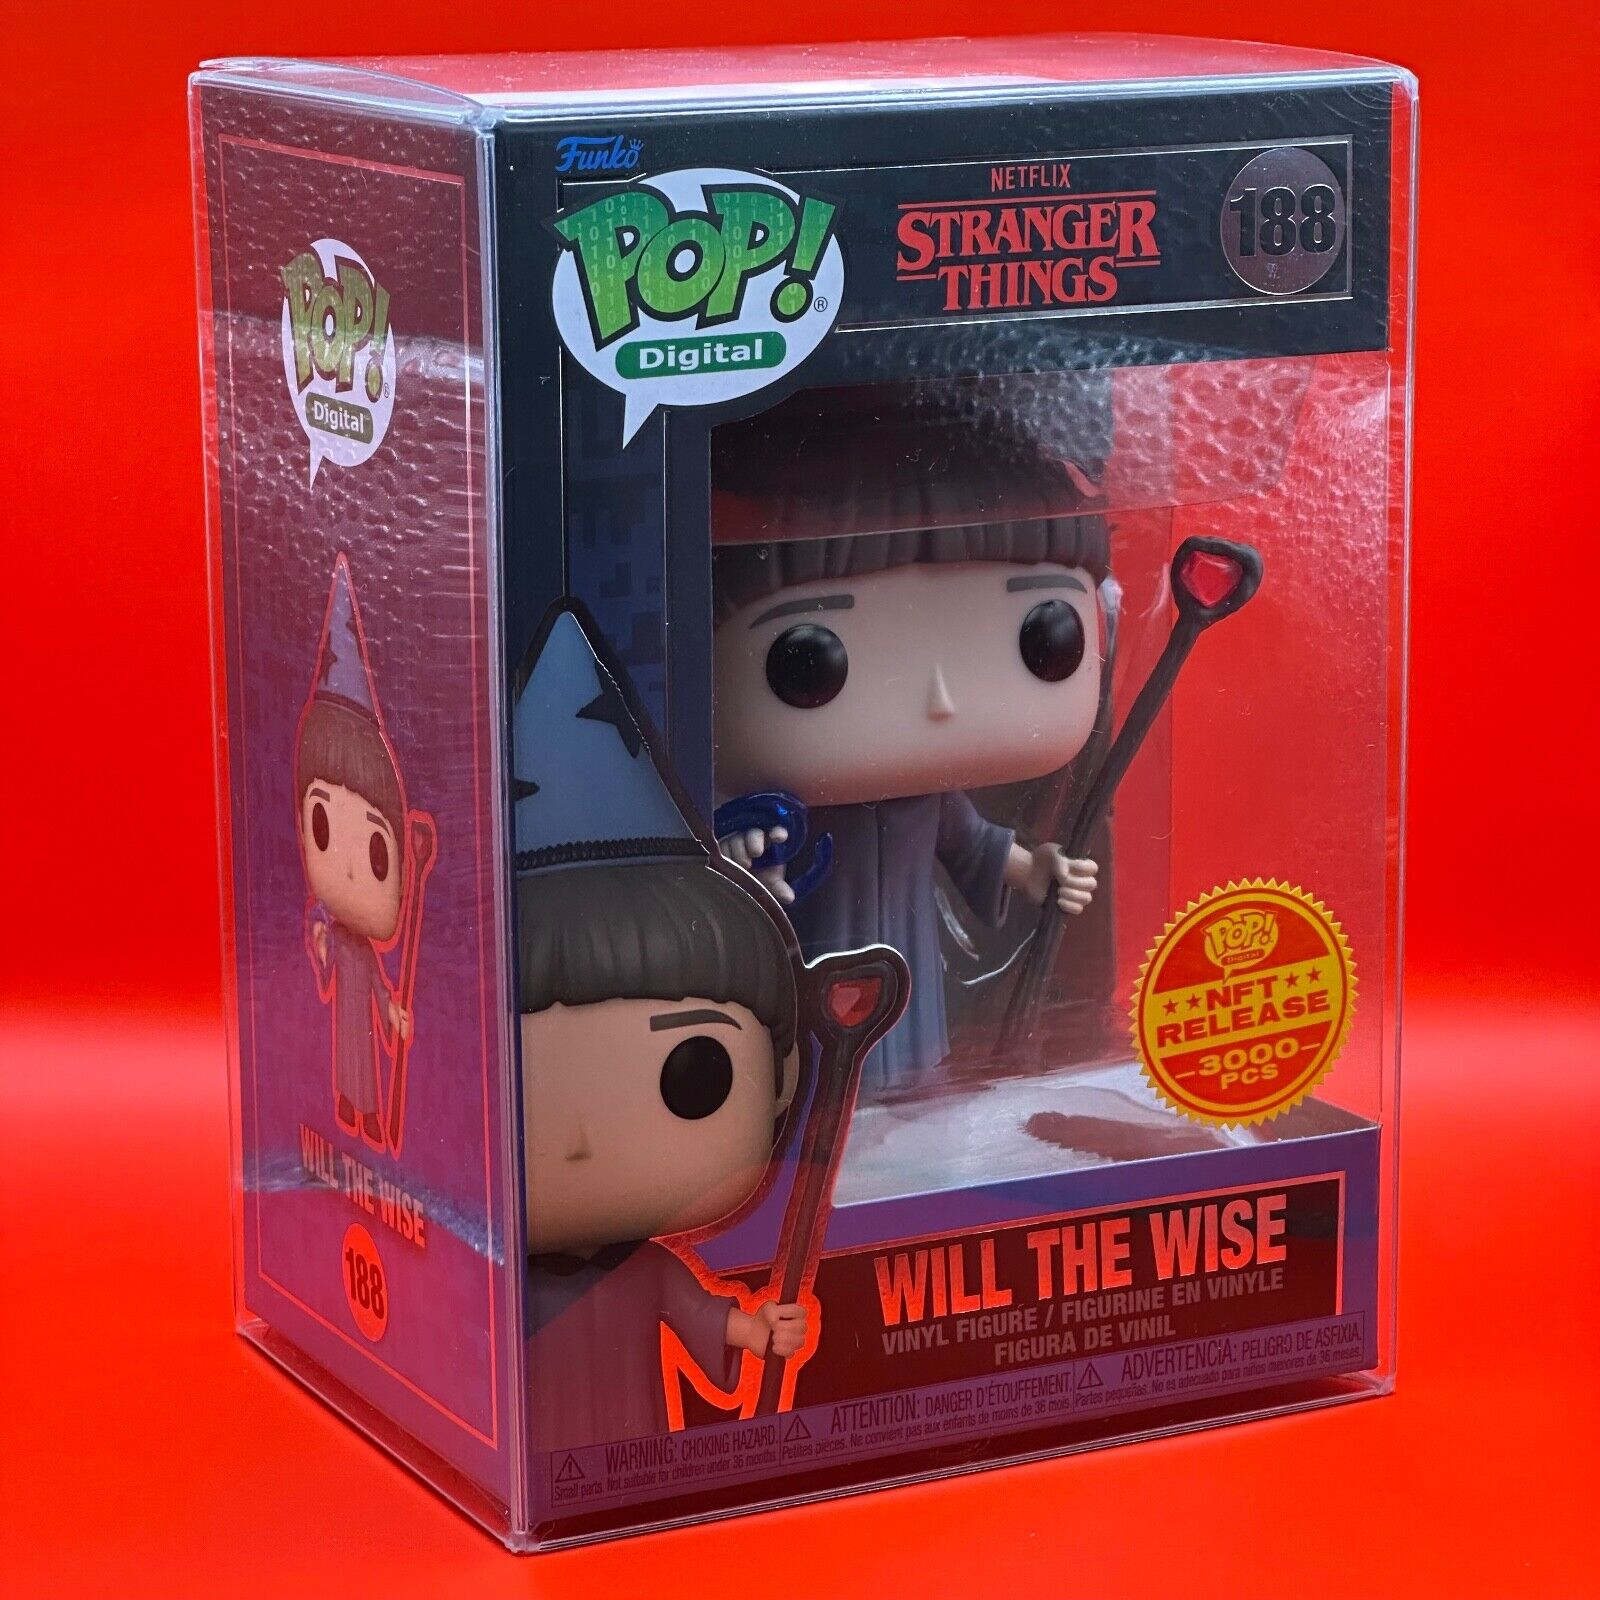 Funko Pop Digital Exclusive Will the Wise Stranger Things #188 LE3000 